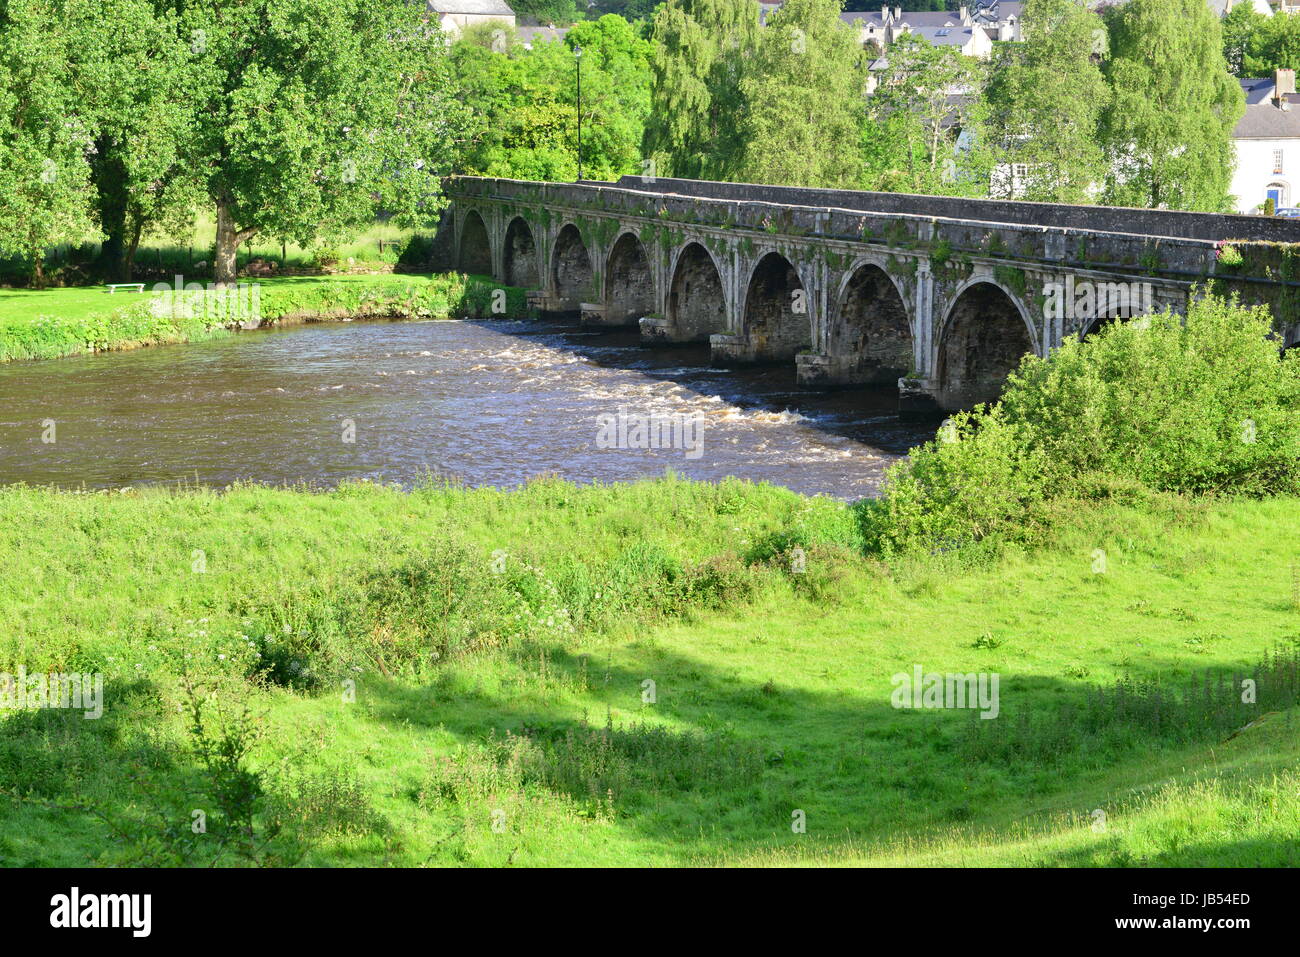 The bridge at the village of Inistioge in Summertime Stock Photo